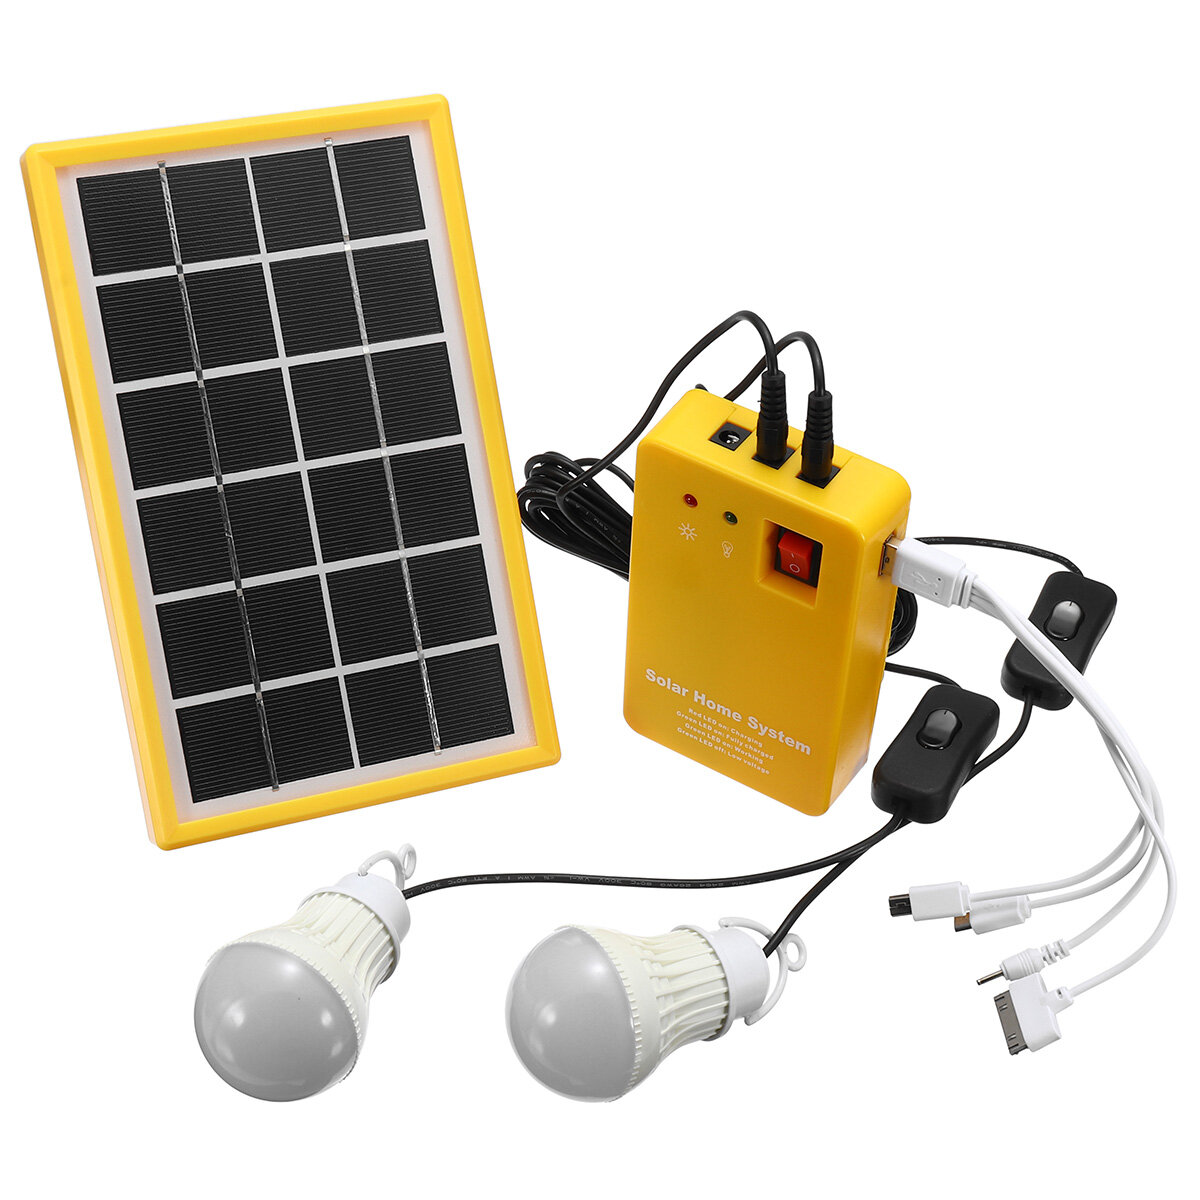 Image of Solar Power Panel Generator Kit 5V USB Charger Home System with 3 LED Bulbs Light